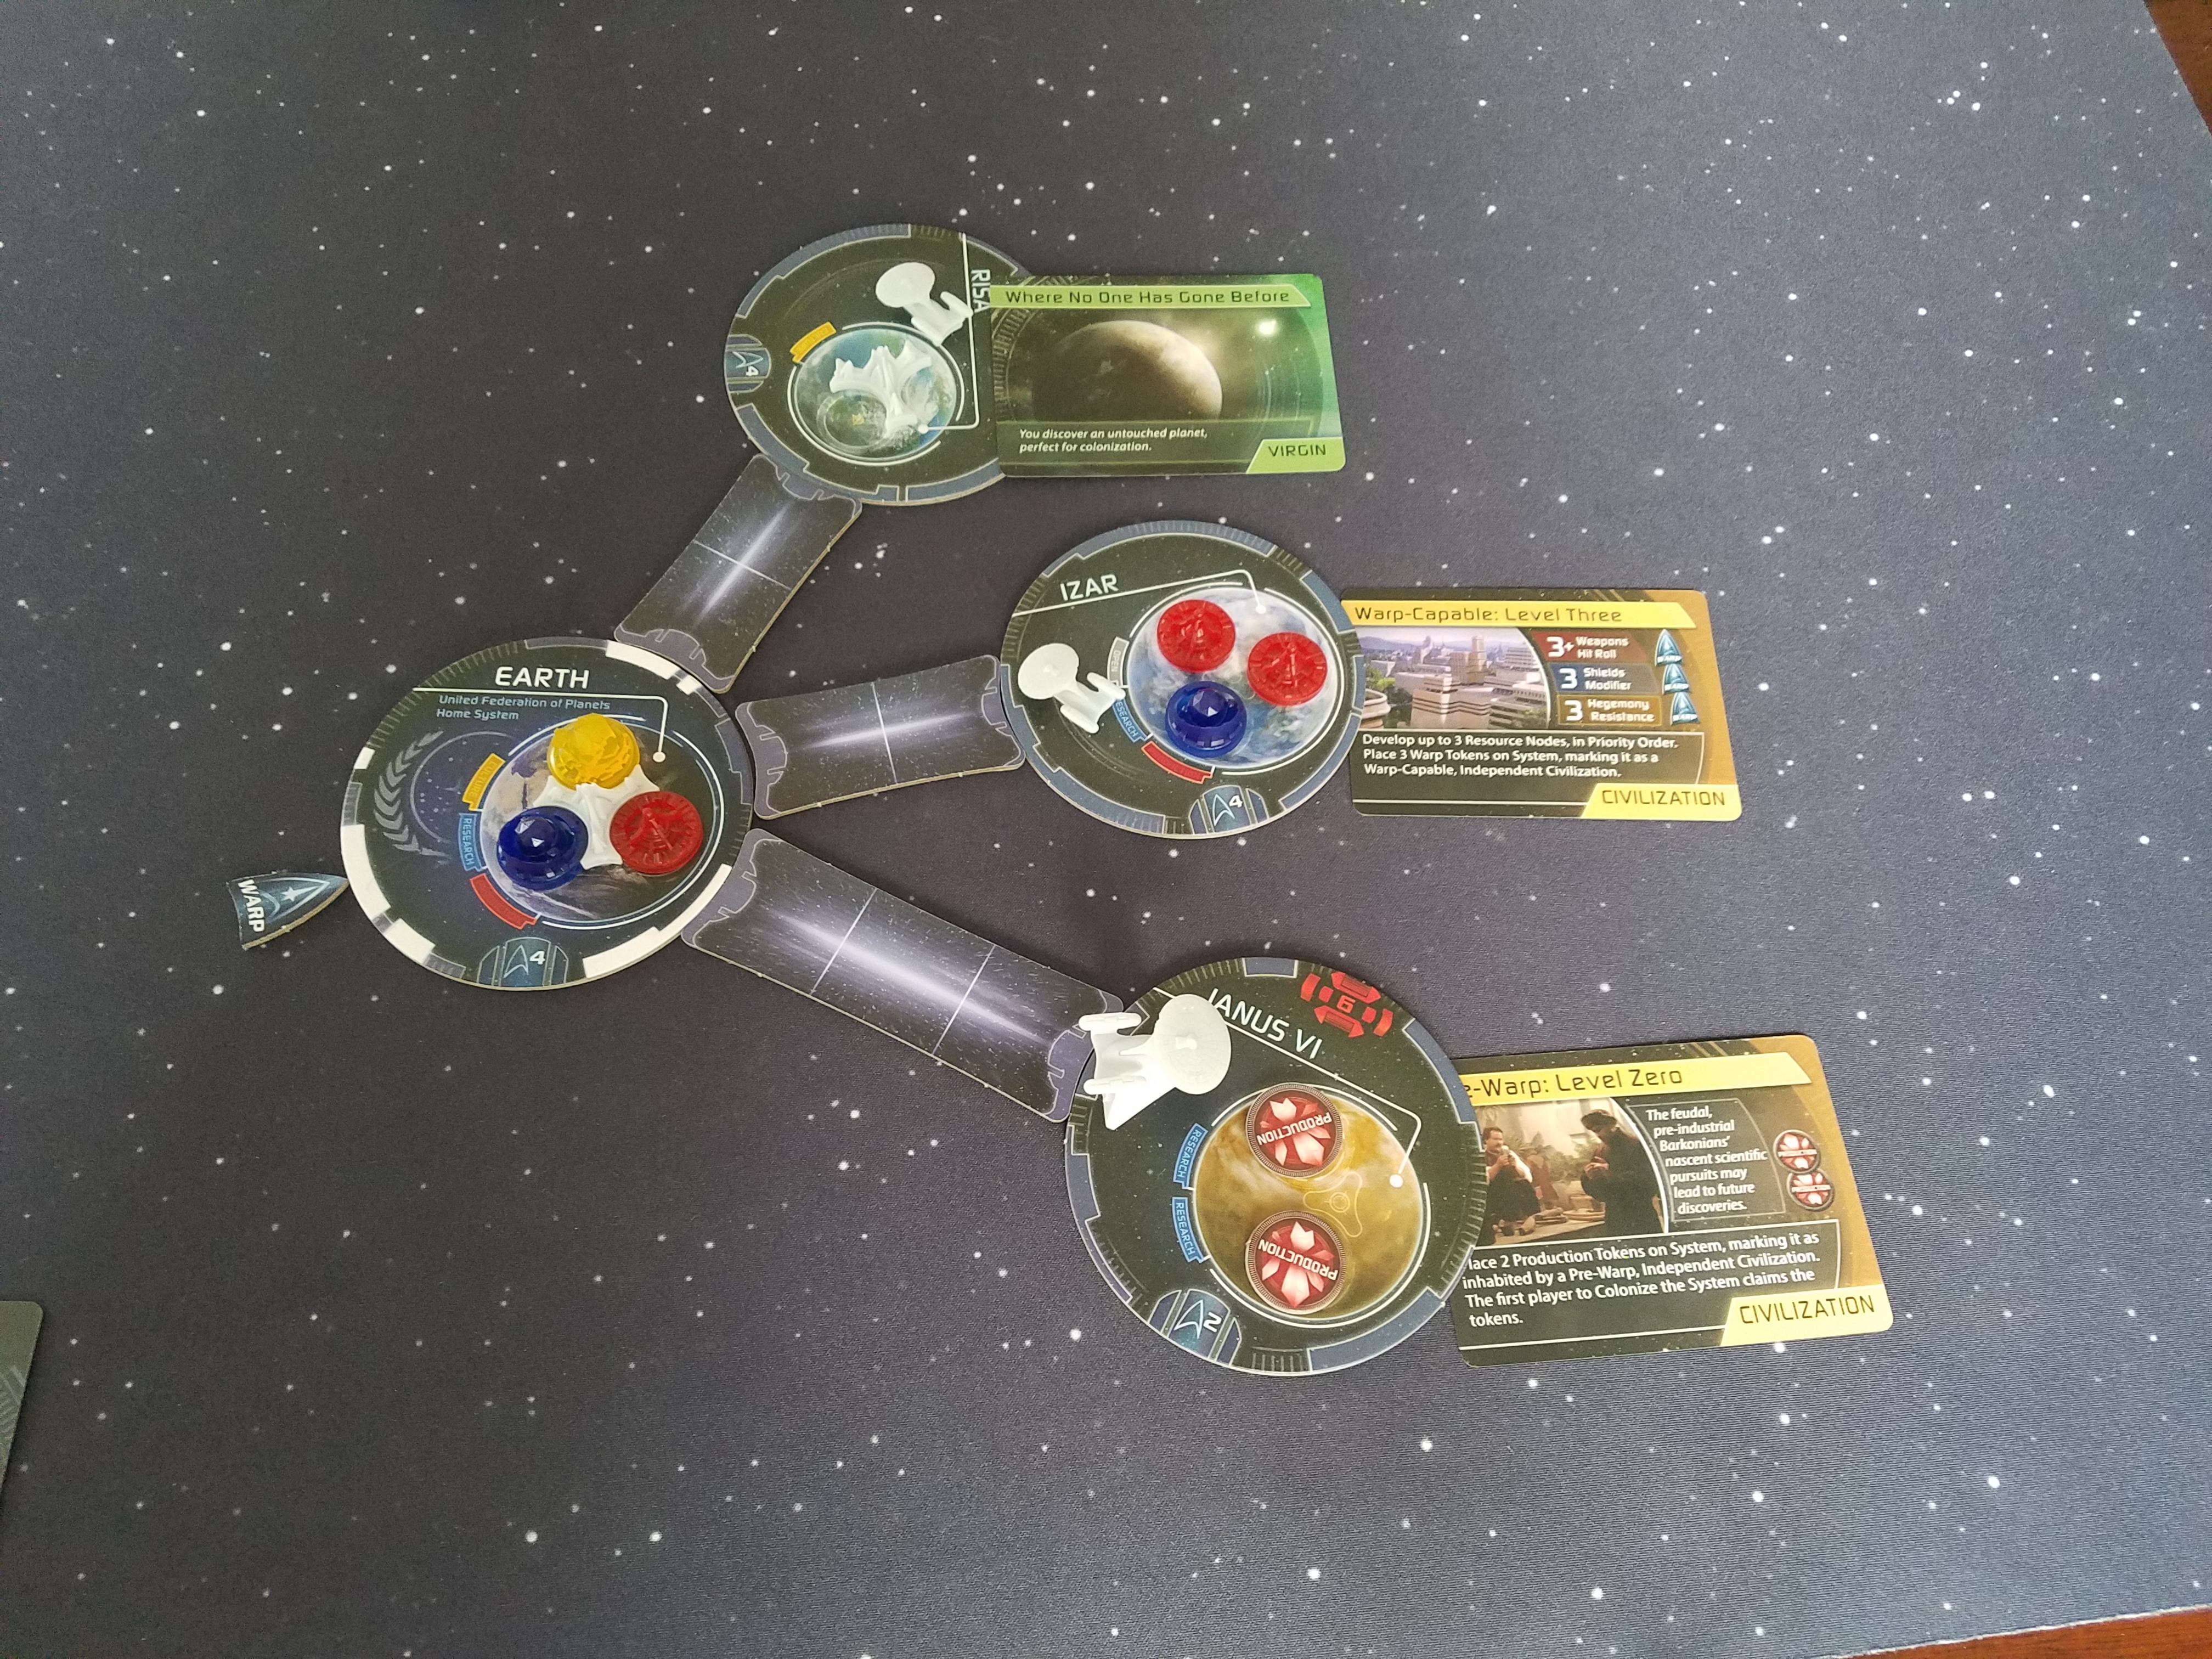 Ascendancy IS a Trek game about exploring the final frontier 